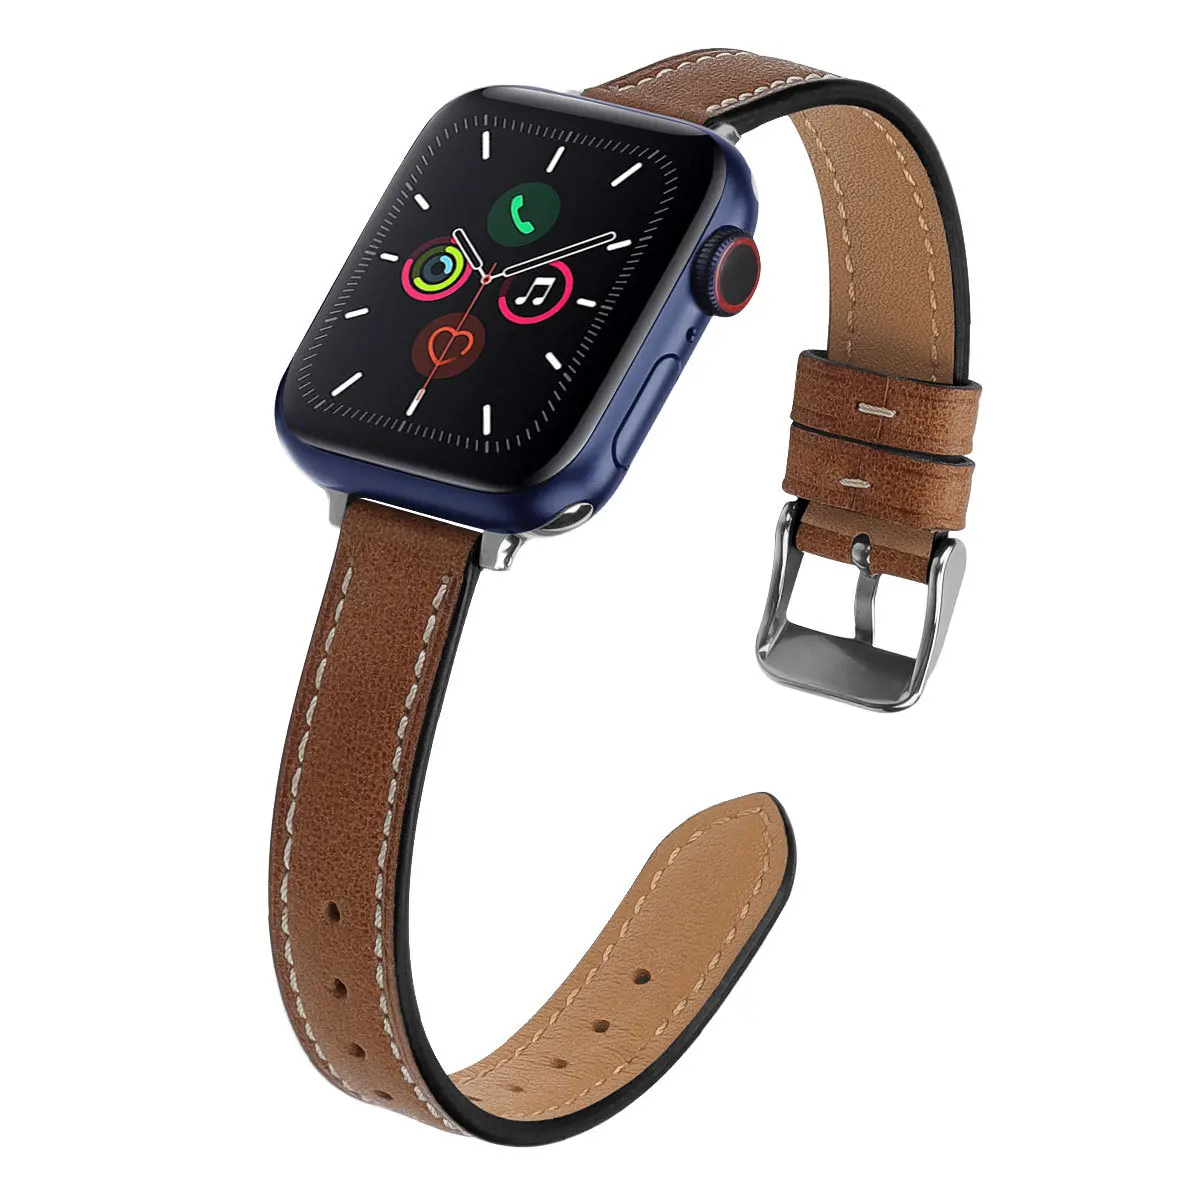 Enlarge Apple Watch Vintage Leather Thin Strap Shrinks Small Waist